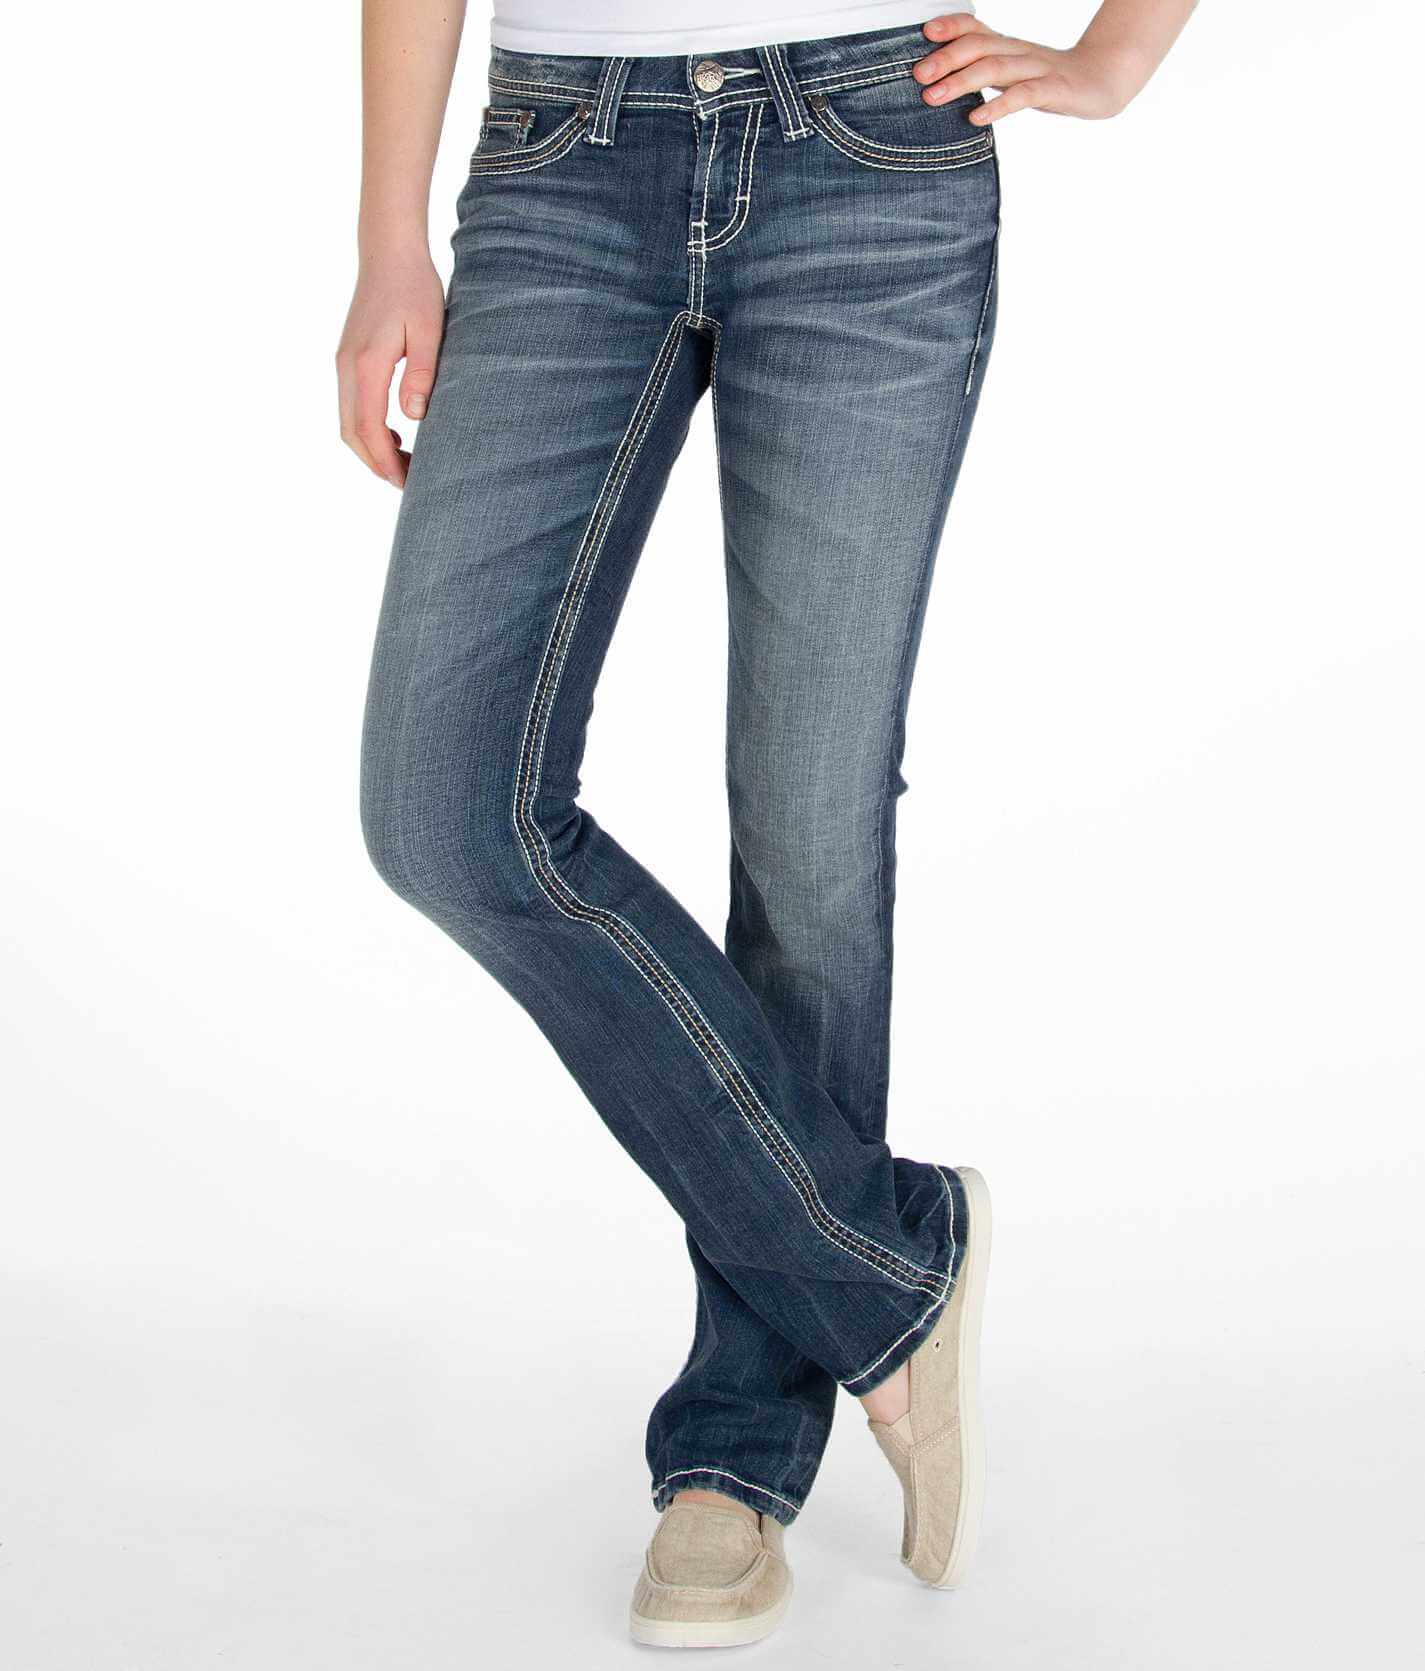 buckle culture jeans